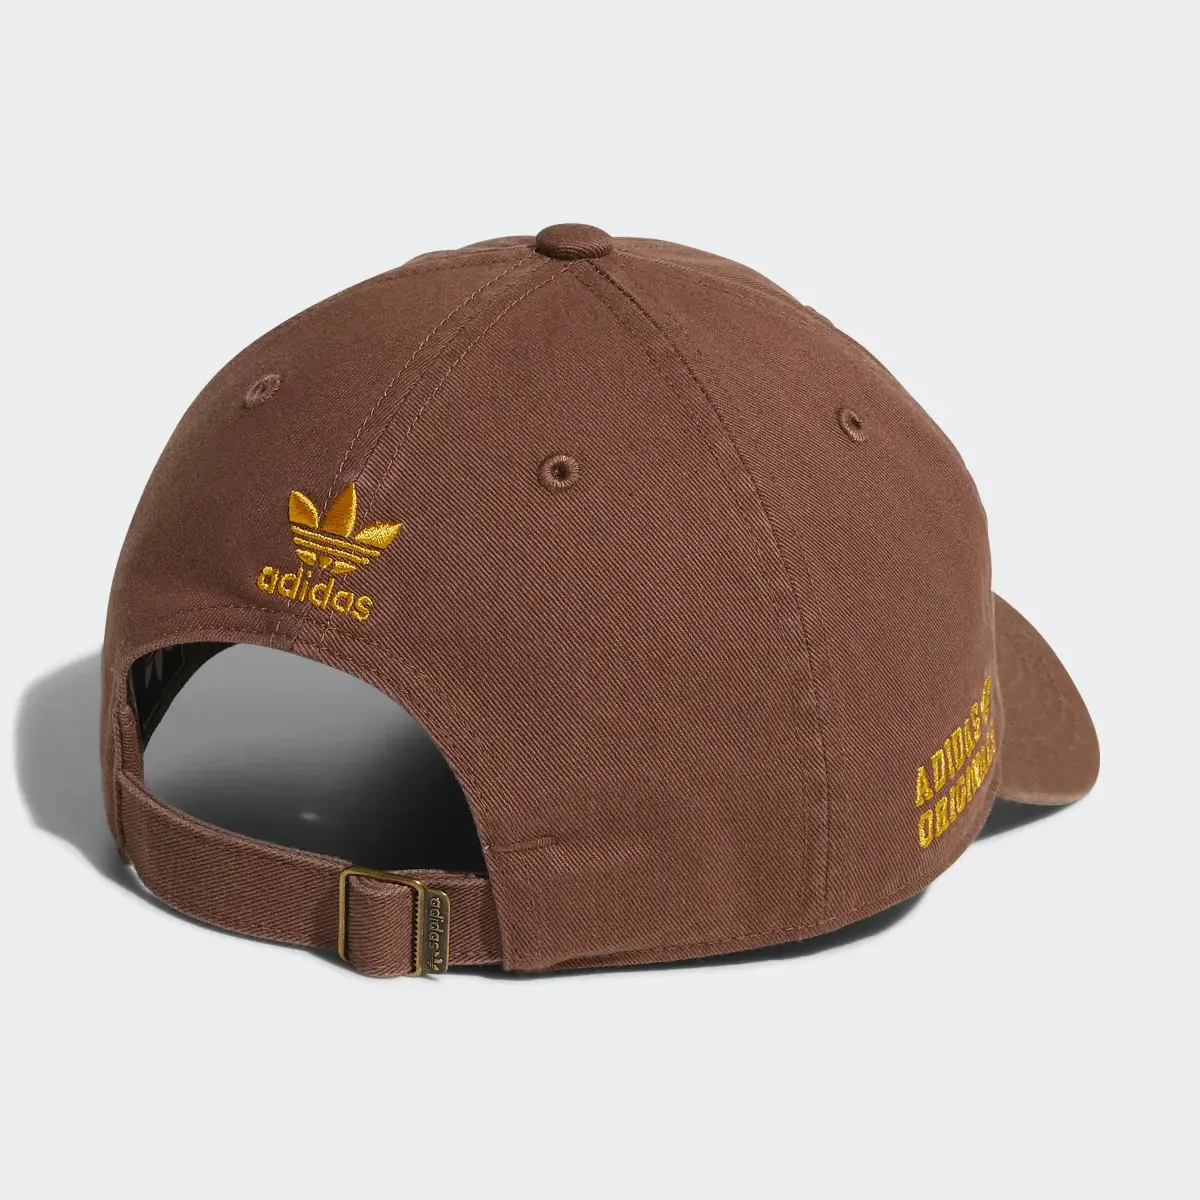 Adidas Relaxed New Prep Hat. 3